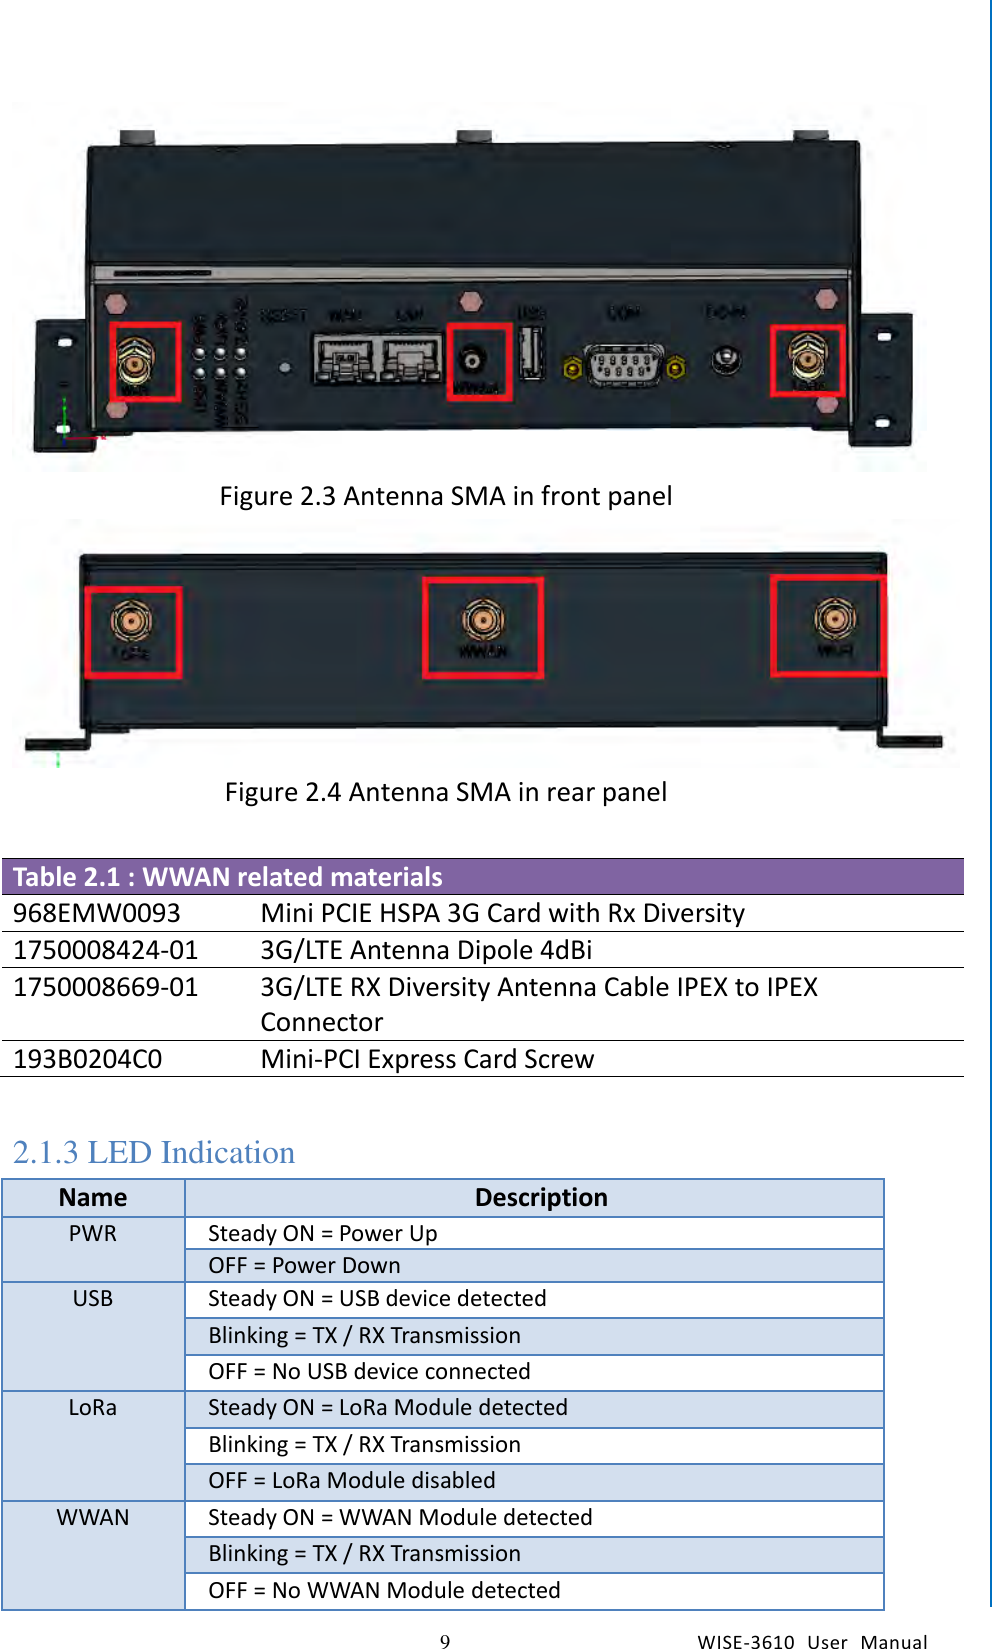    9  WISE-3610  User  Manual  Chapter2  H/W Installation  Figure 2.3 Antenna SMA in front panel  Figure 2.4 Antenna SMA in rear panel  Table 2.1 : WWAN related materials 968EMW0093 Mini PCIE HSPA 3G Card with Rx Diversity 1750008424-01 3G/LTE Antenna Dipole 4dBi 1750008669-01 3G/LTE RX Diversity Antenna Cable IPEX to IPEX Connector 193B0204C0 Mini-PCI Express Card Screw  2.1.3 LED Indication Name     Description PWR Steady ON = Power Up OFF = Power Down USB Steady ON = USB device detected Blinking = TX / RX Transmission OFF = No USB device connected LoRa Steady ON = LoRa Module detected Blinking = TX / RX Transmission OFF = LoRa Module disabled WWAN Steady ON = WWAN Module detected Blinking = TX / RX Transmission OFF = No WWAN Module detected 